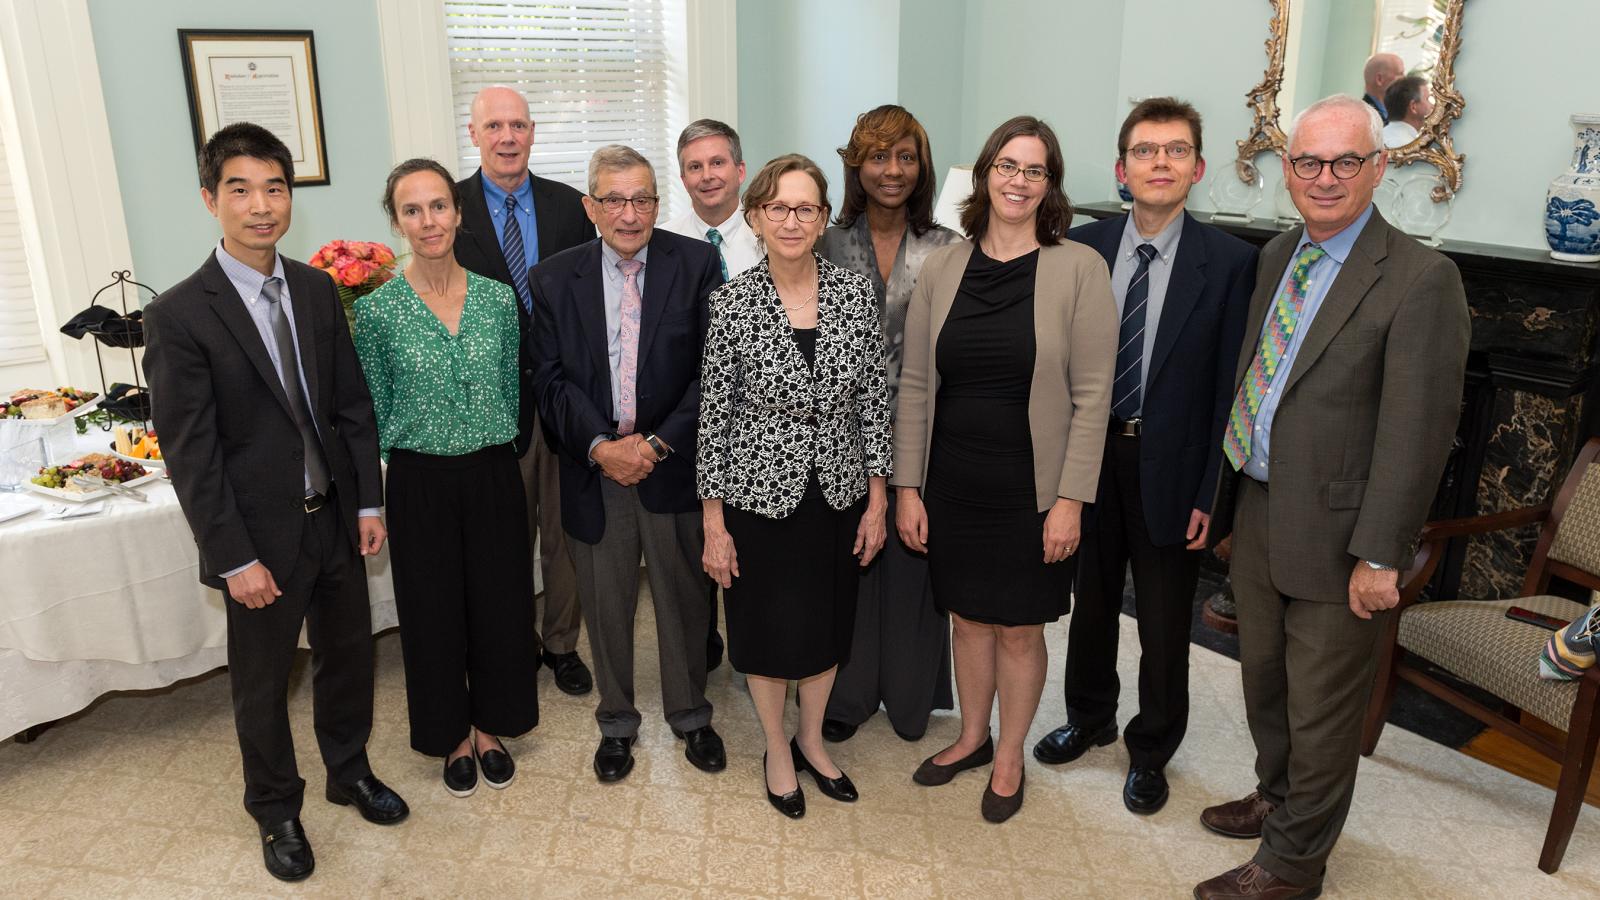 Blick Scholars, deans, and department chairs with Dr. Rappley